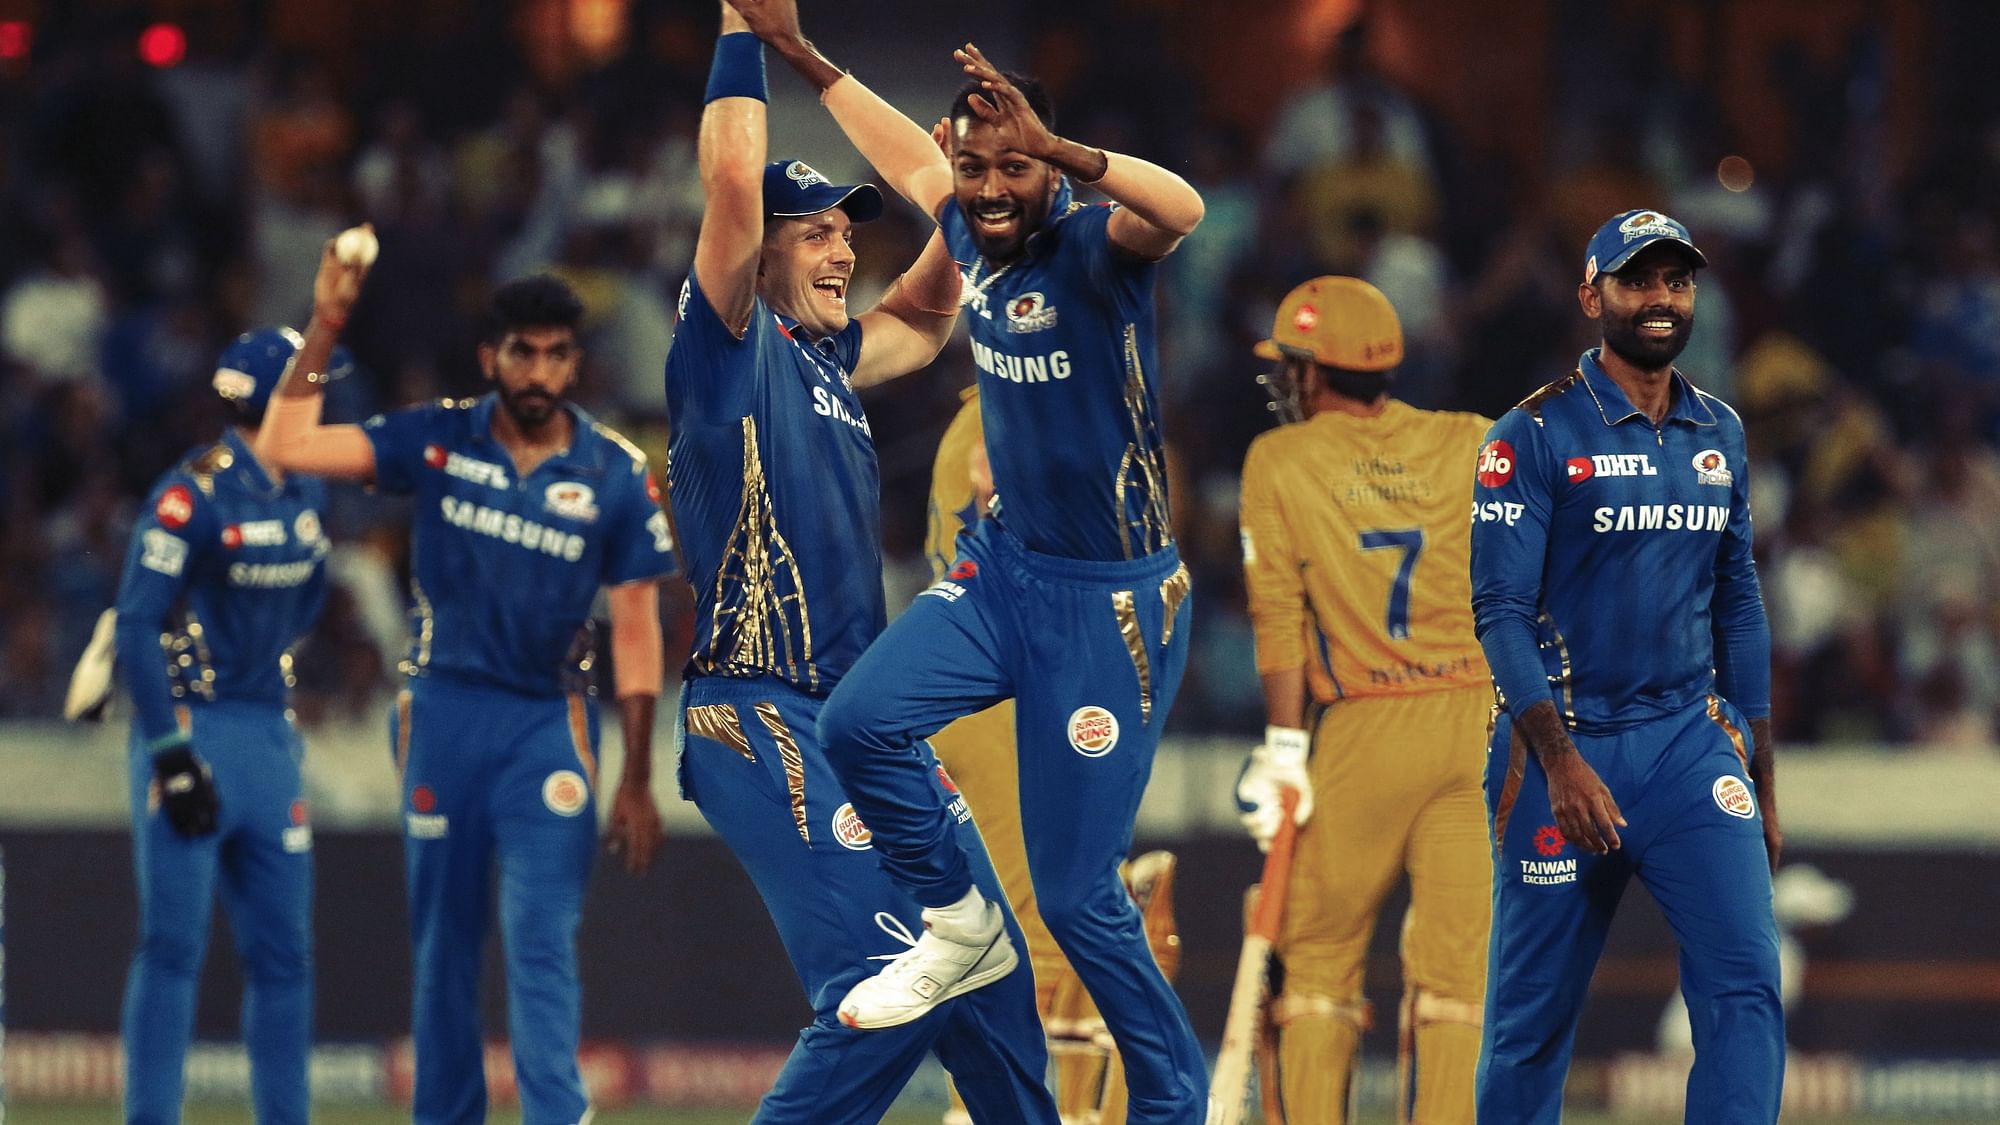 Mumbai Indians and Chennai Super Kings, the two powerhouses of the IPL lock horns against each other for the fourth time in 12 seasons.